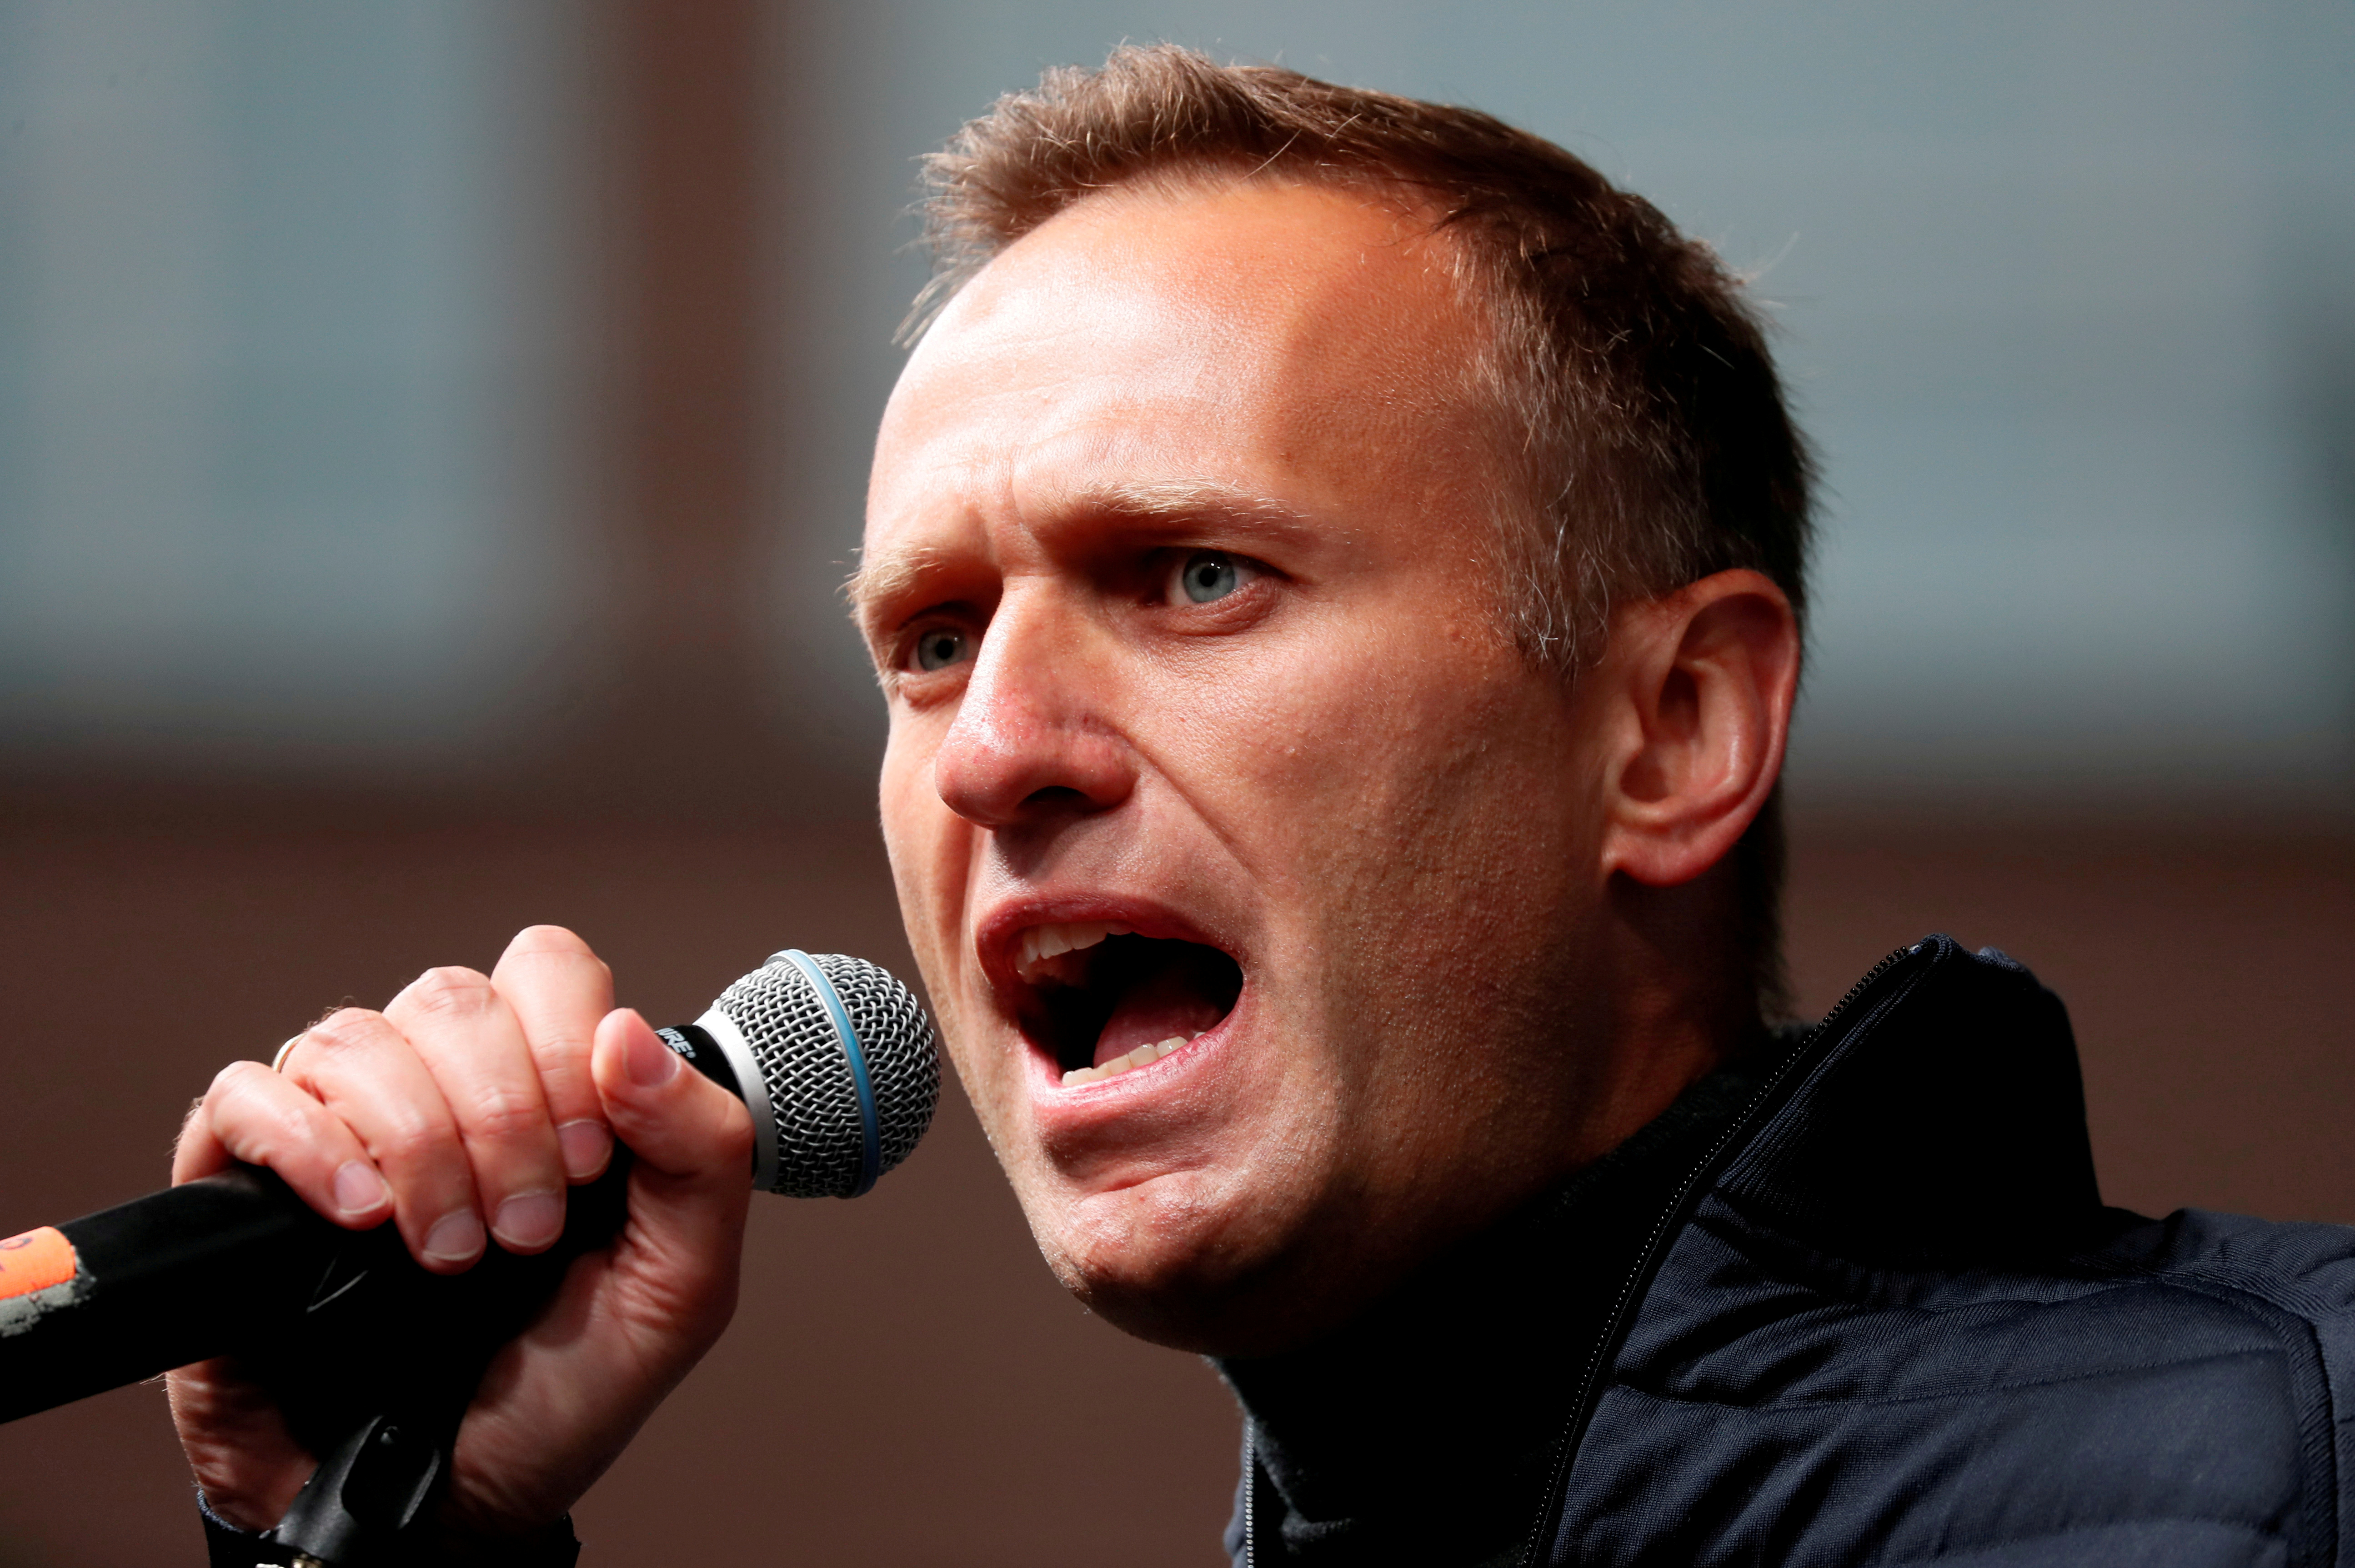 Russian opposition figure Alexei Navalny pictured in 2019